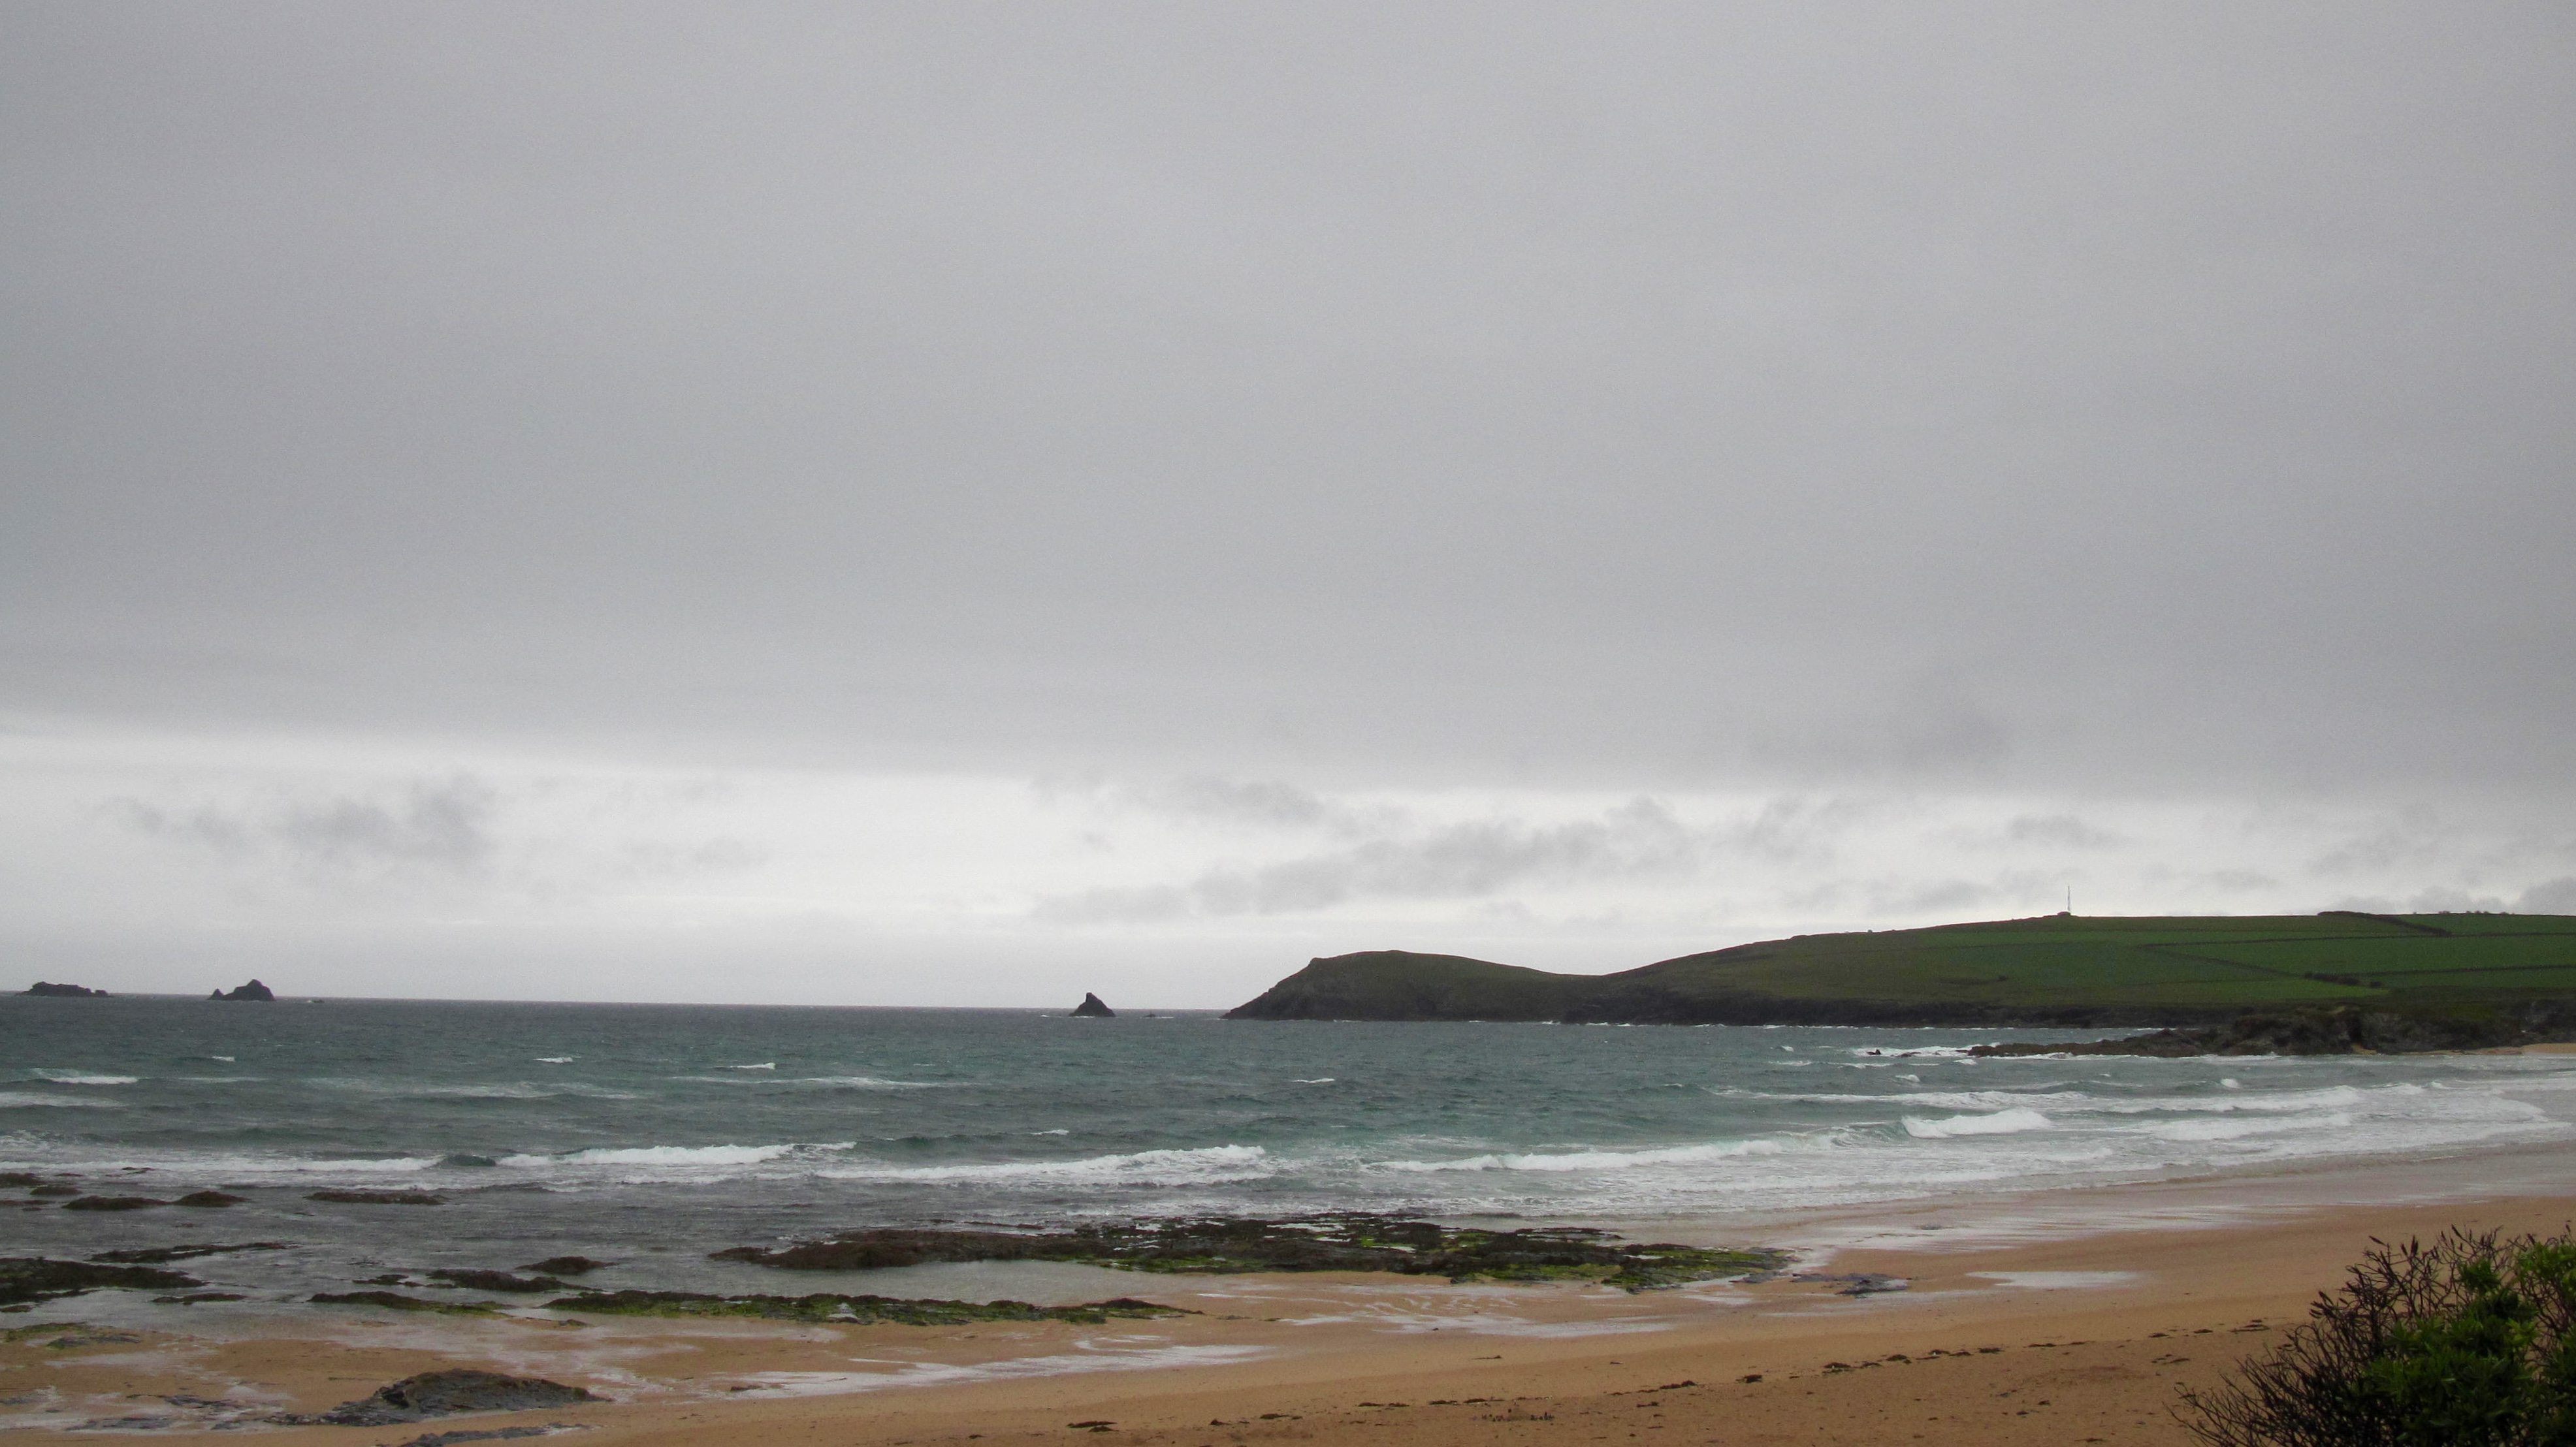 Surf Report for Sunday 31st May 2015